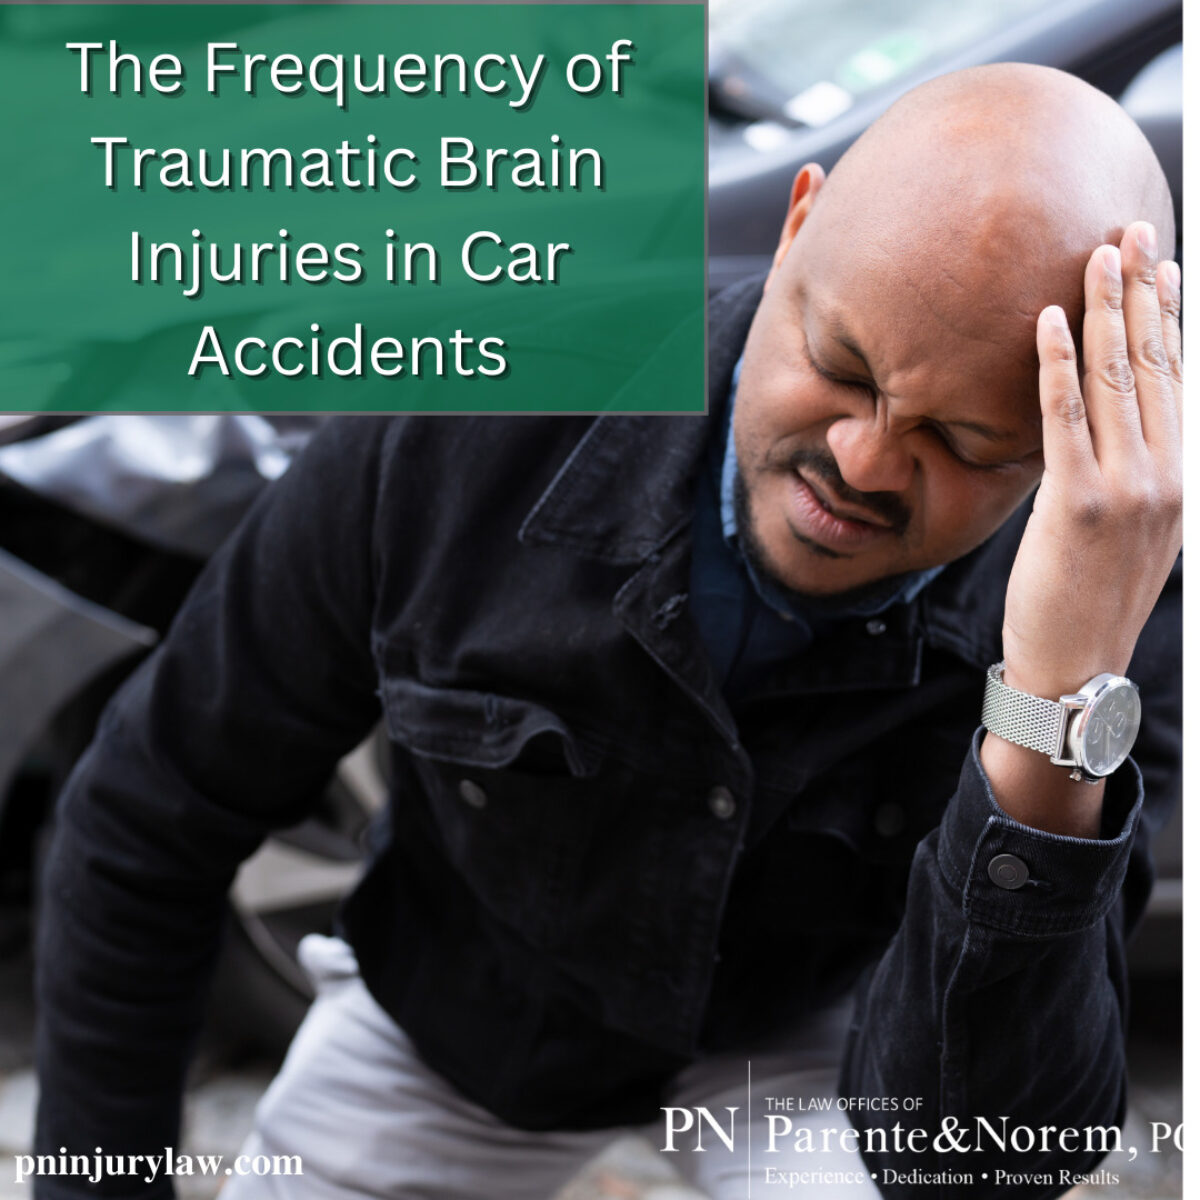 P&N BLOG | The Frequency of Traumatic Brain Injuries in Car Accidents